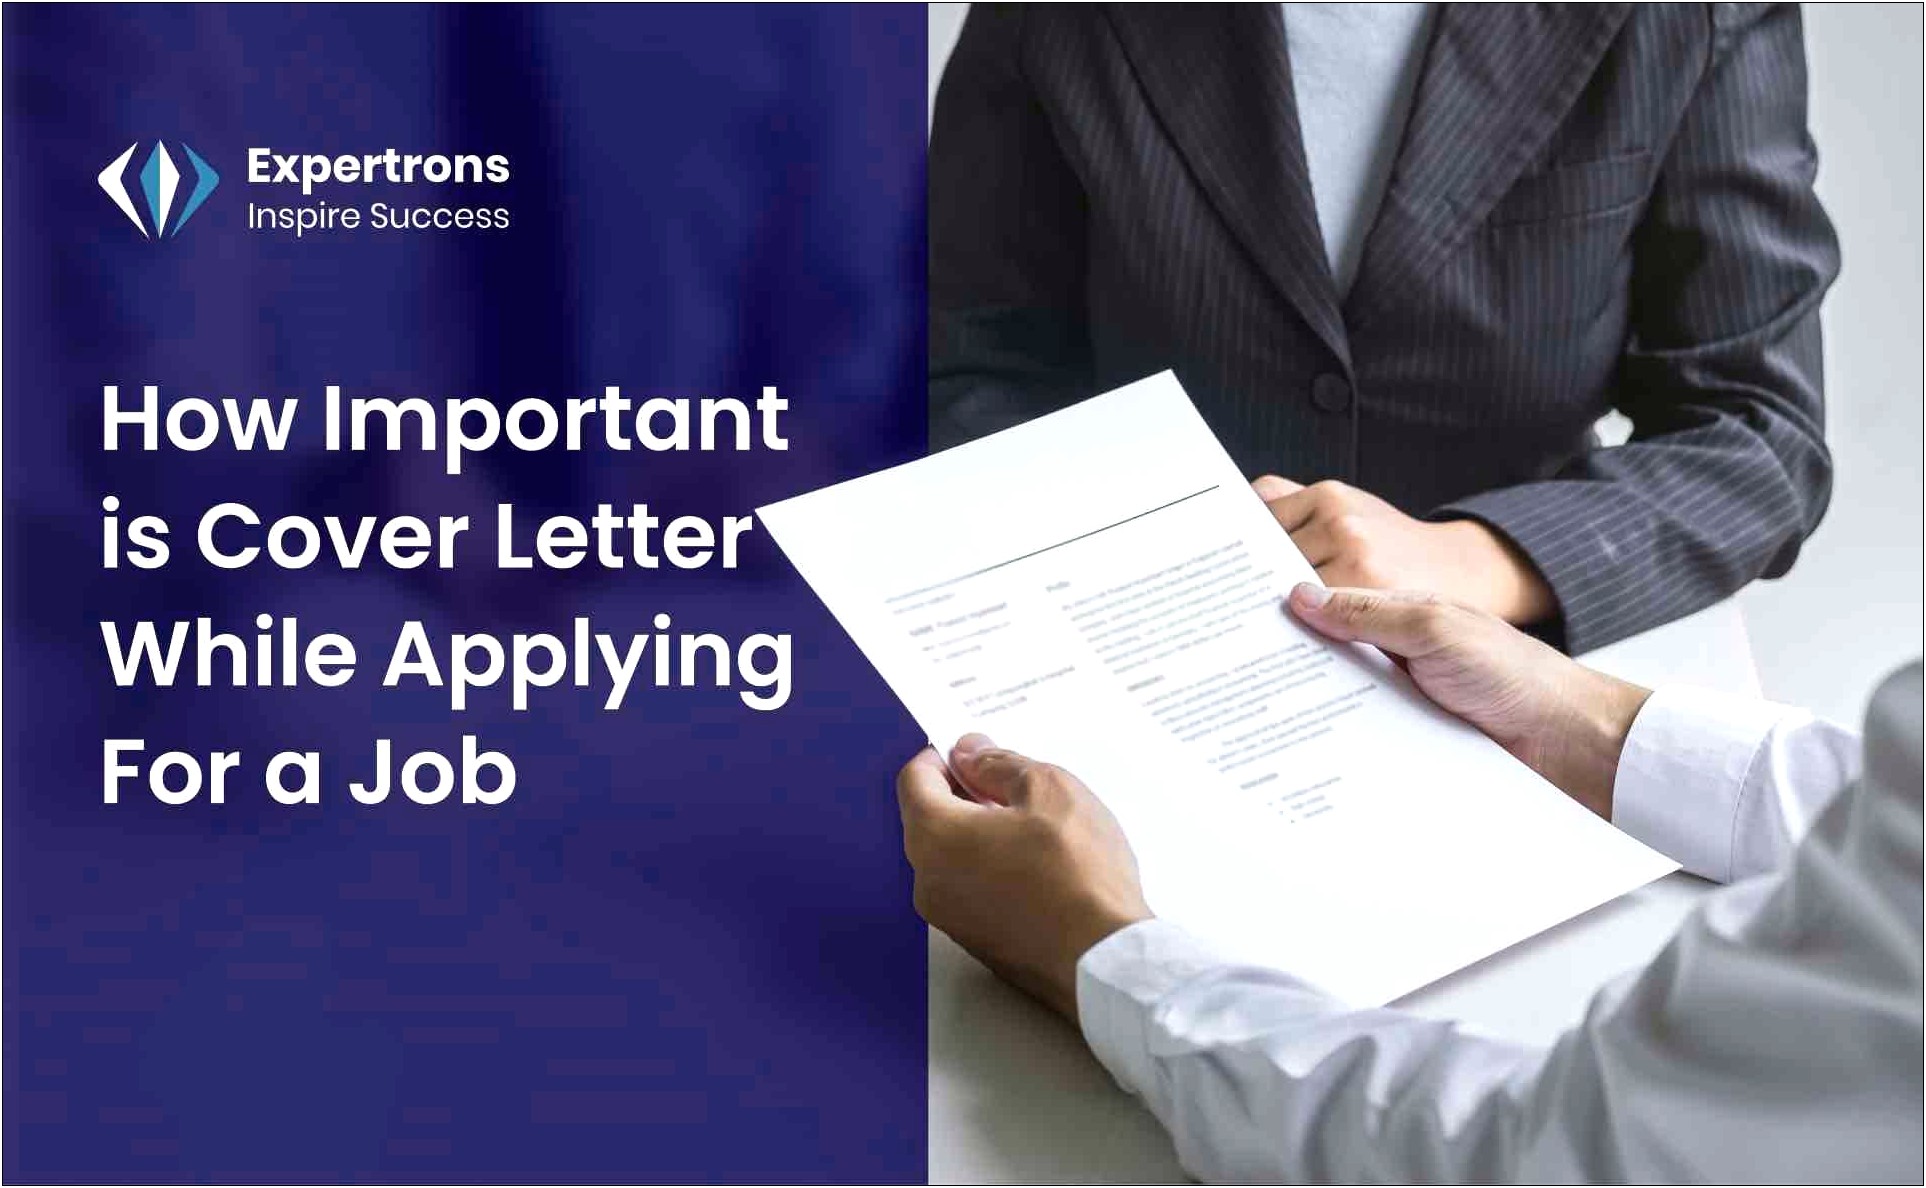 Relationship Between Resume And Application Letter